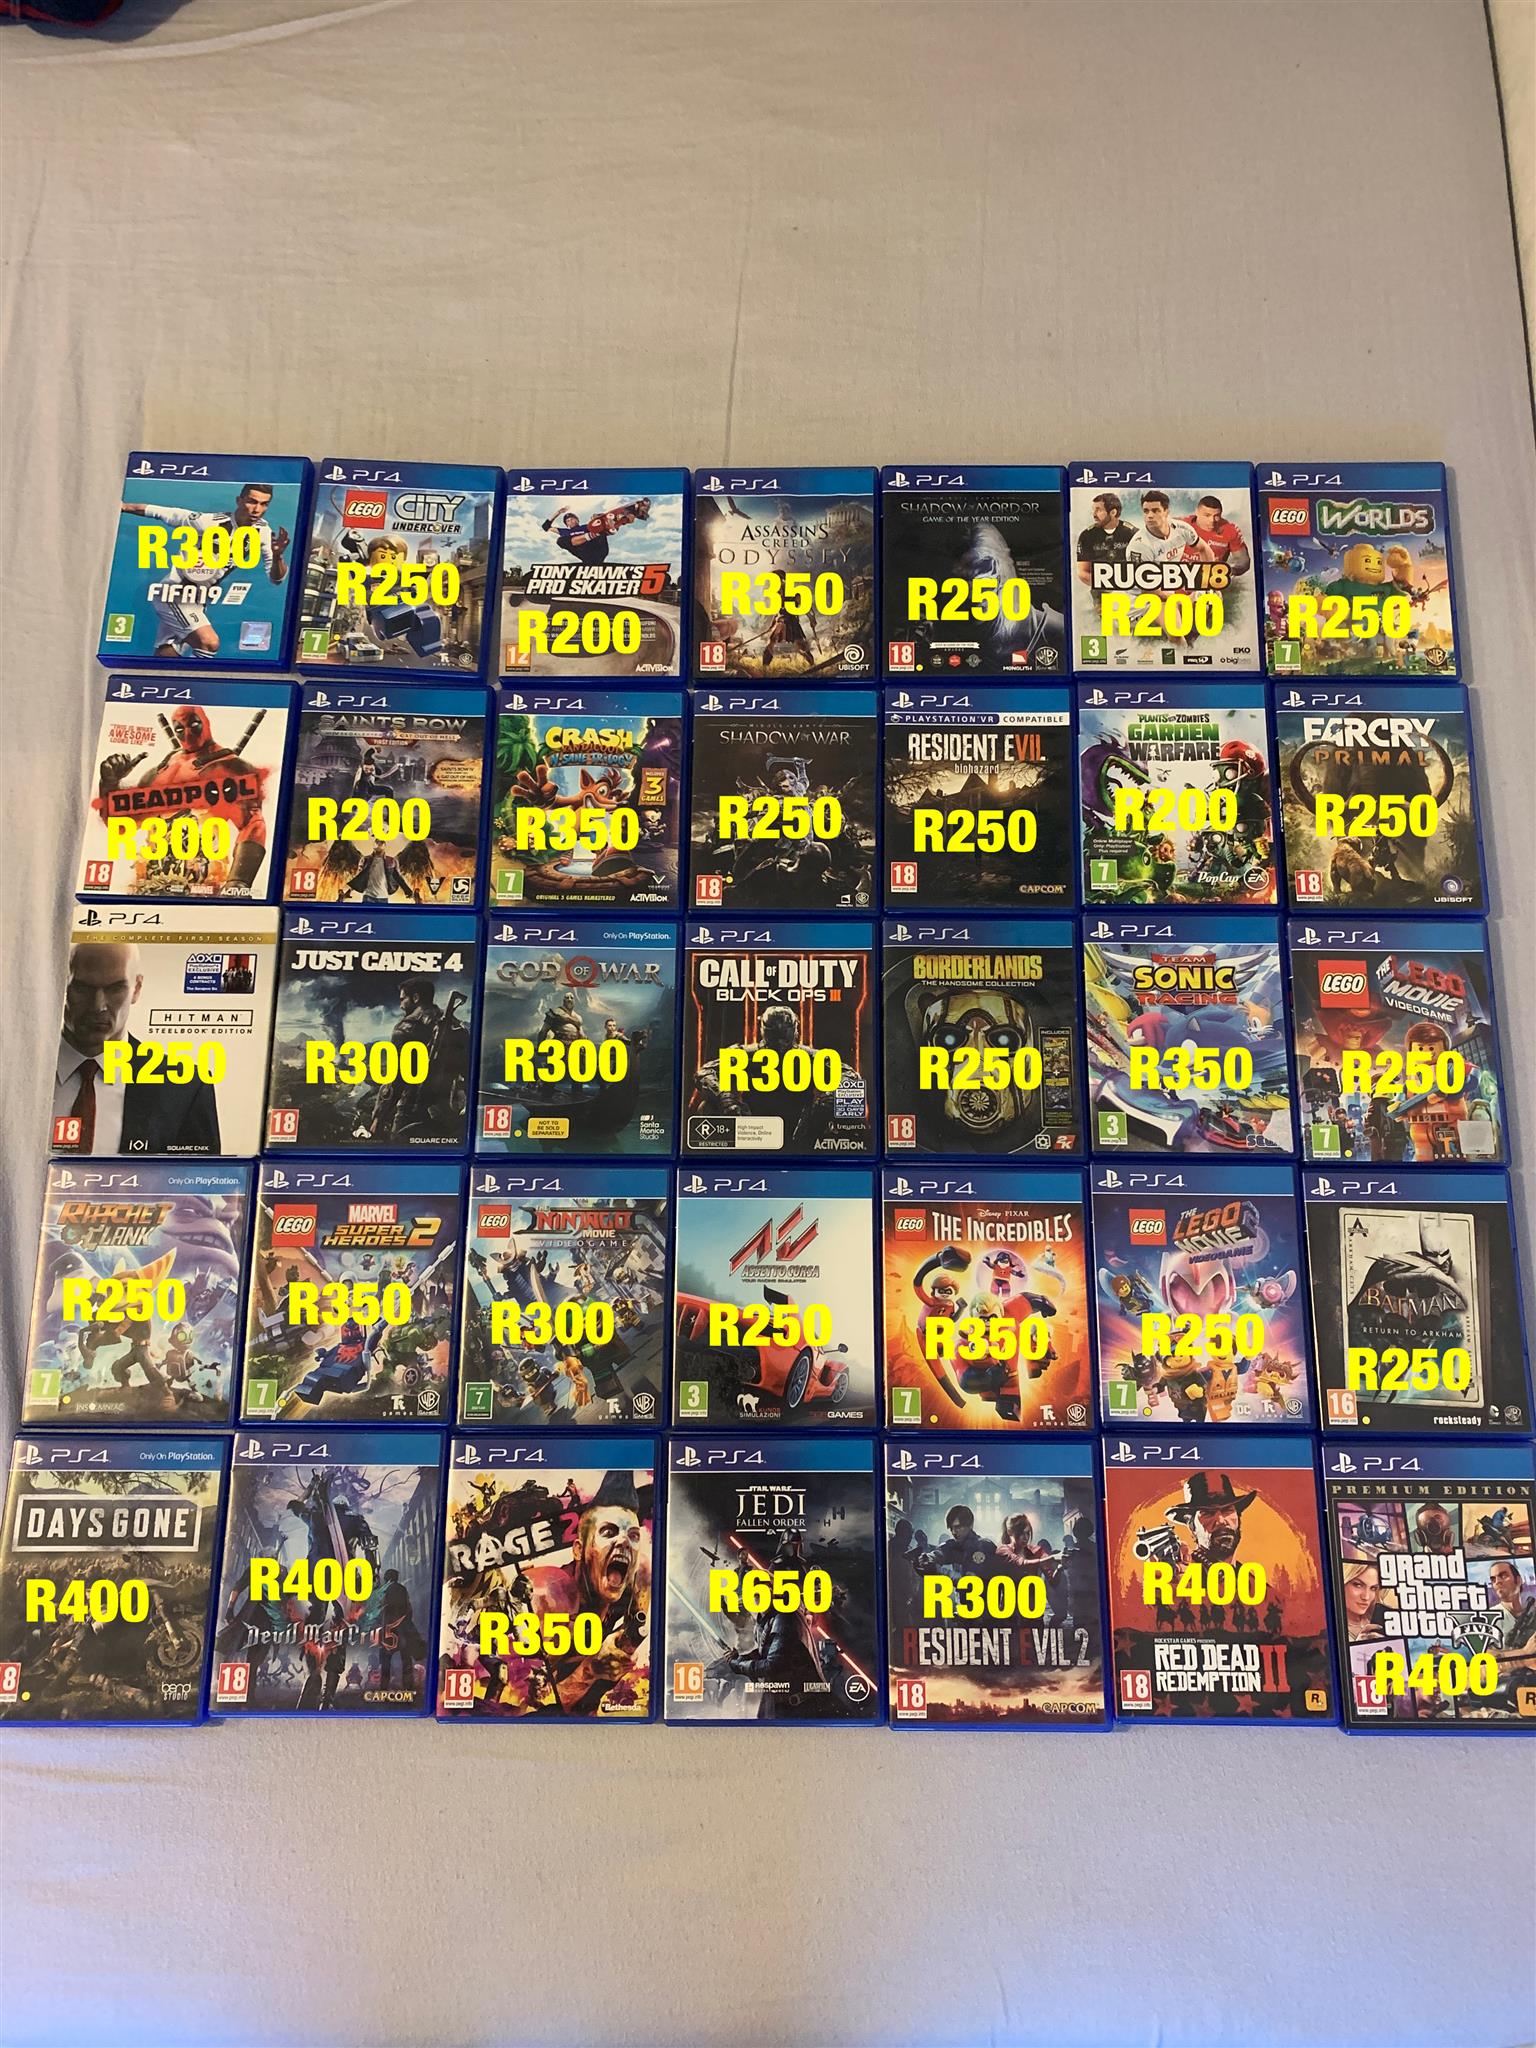 places that sell ps4 games near me